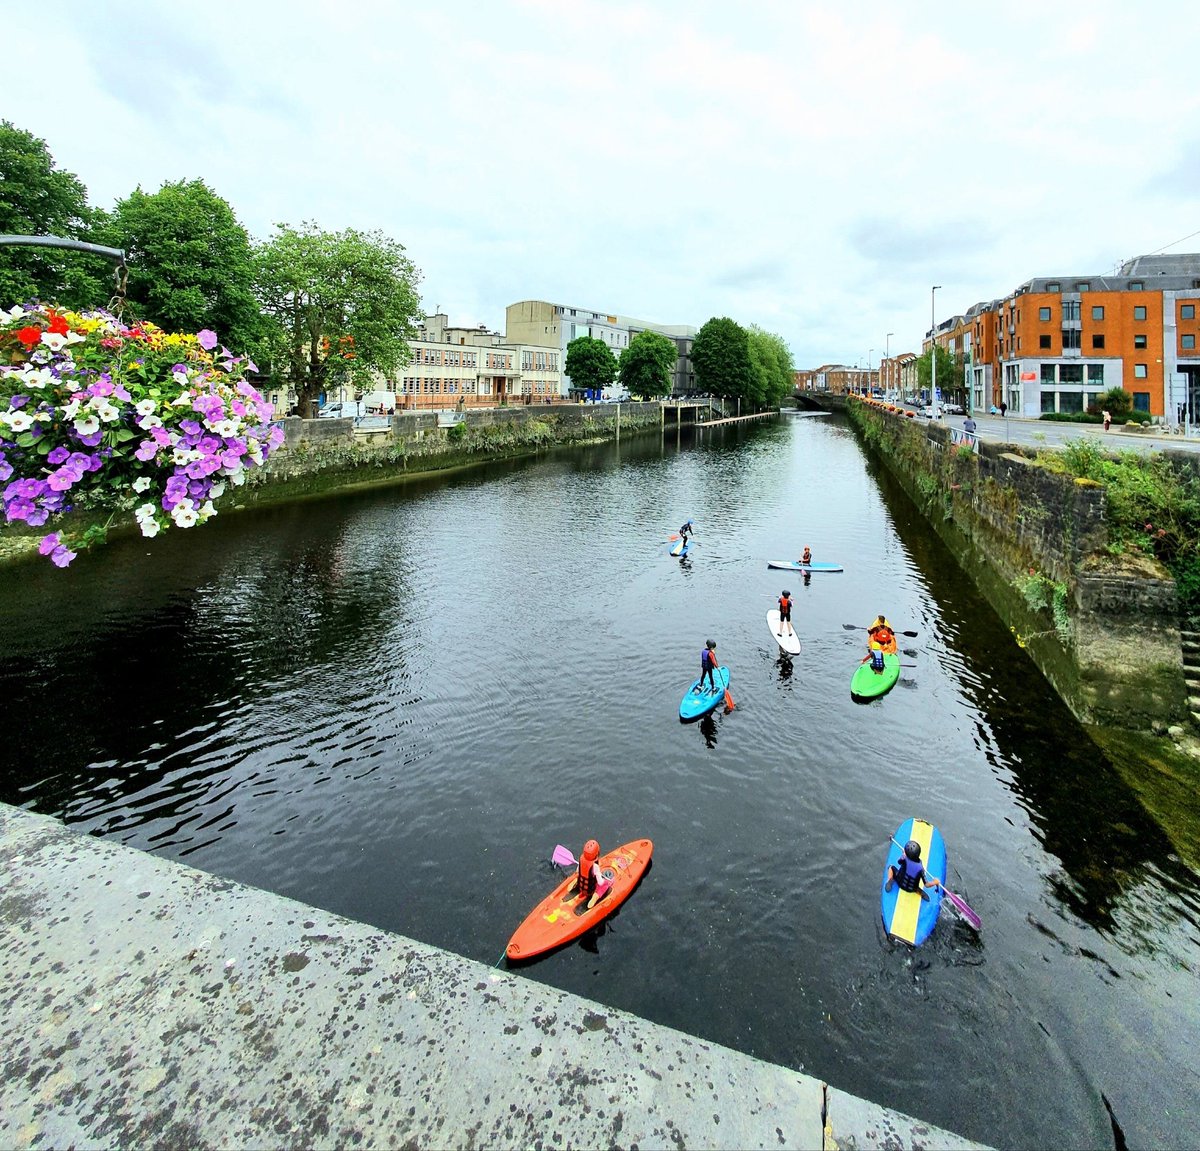 Book an amazing #limerick city #kayaking tour or Stand Up Paddle Boarding #riverfestlimerick @huntmuseum. See Limerick in a whole new way - Book online: nevsailwatersports.ie